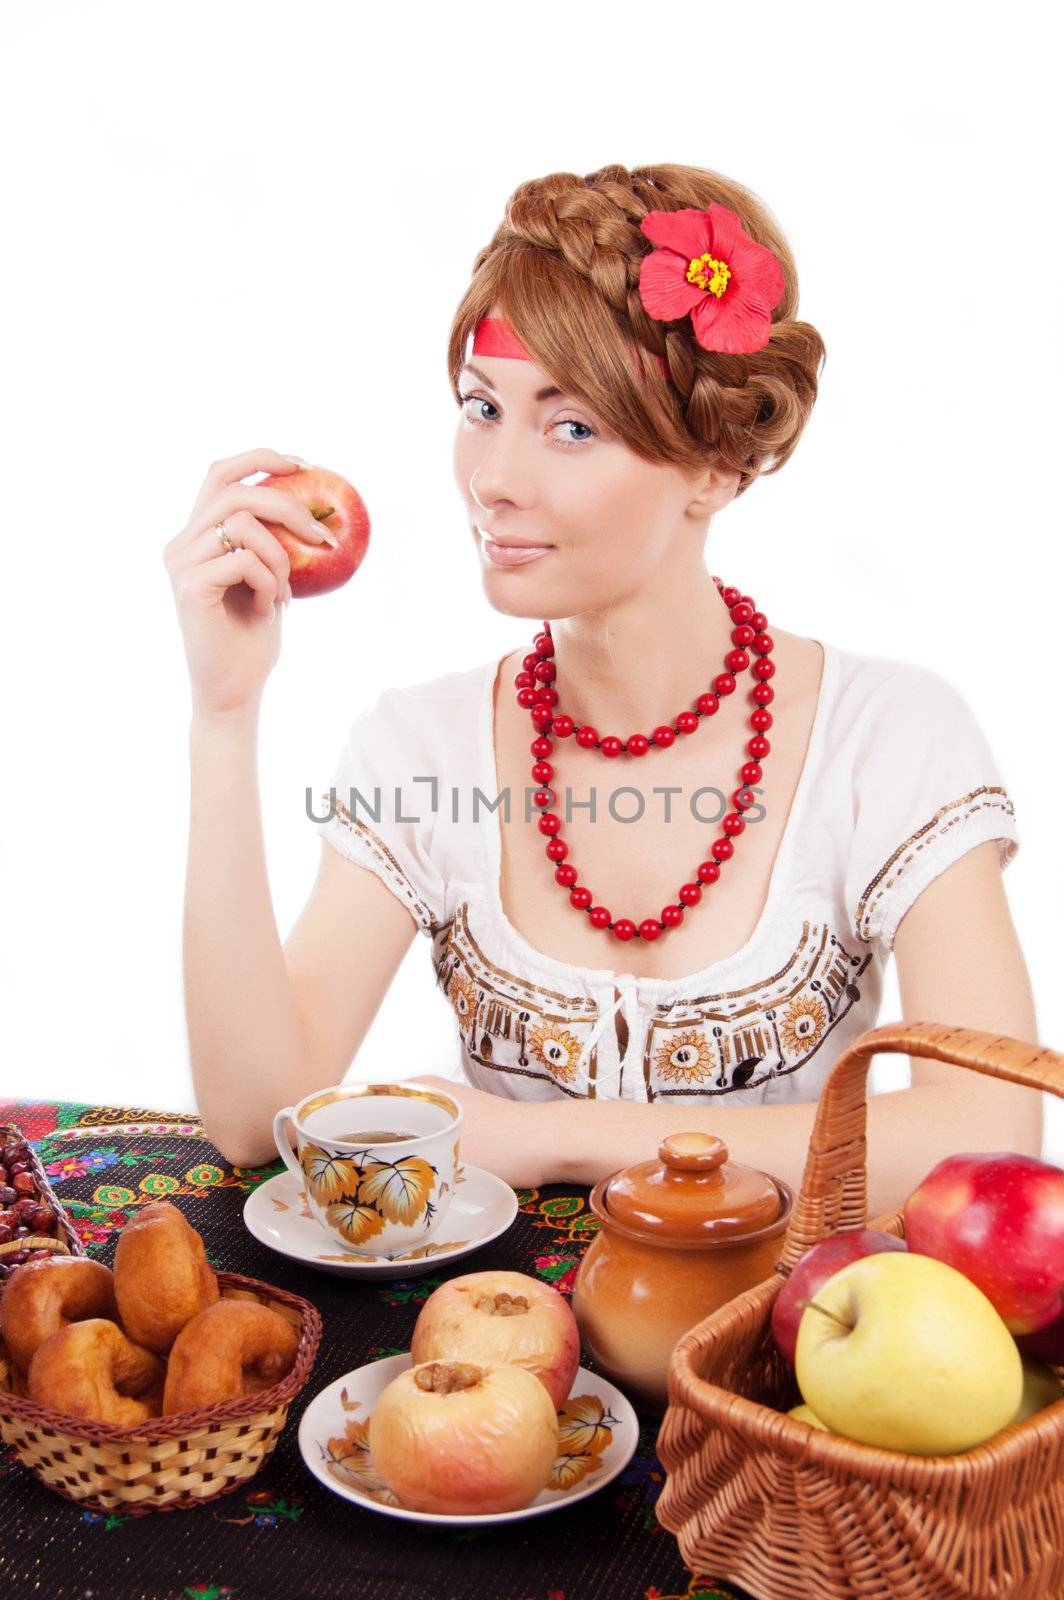 Russian woman eating apples at table over white